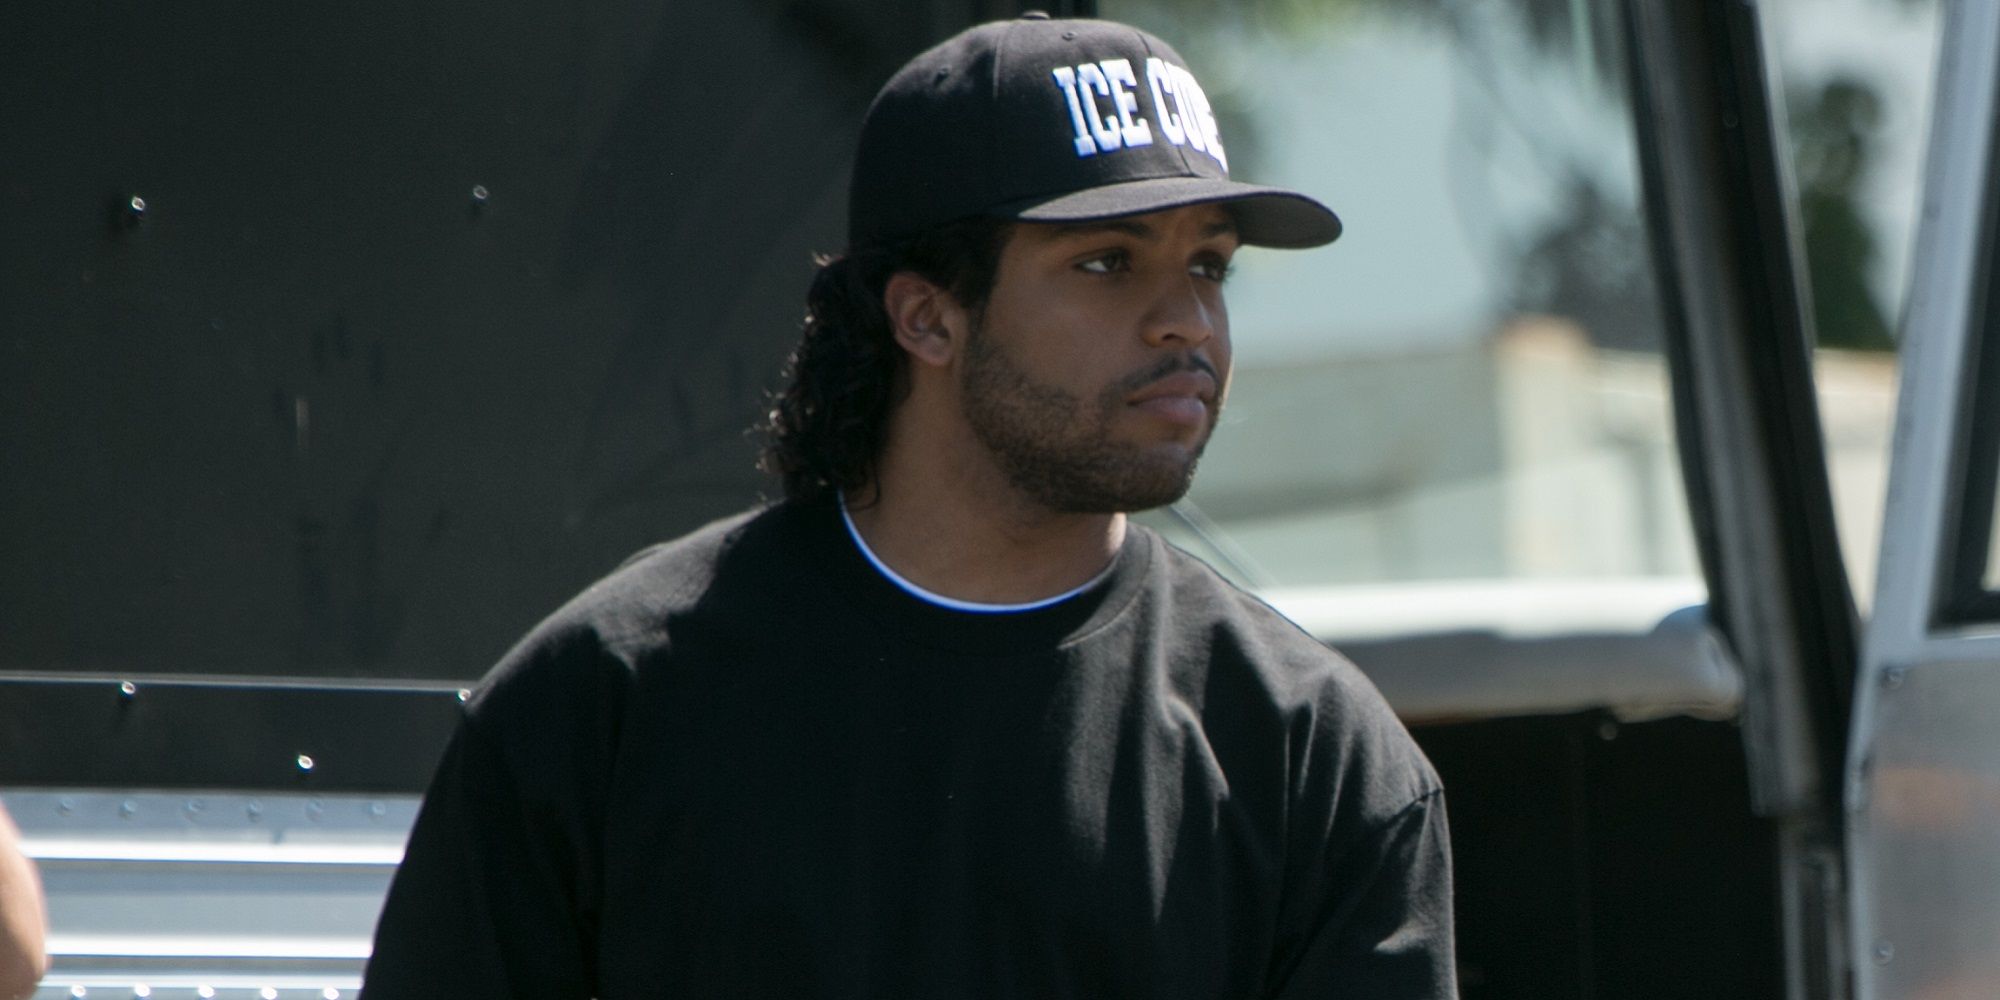 O'Shea Jackson playing his father Icecube in Straight Outta Compton